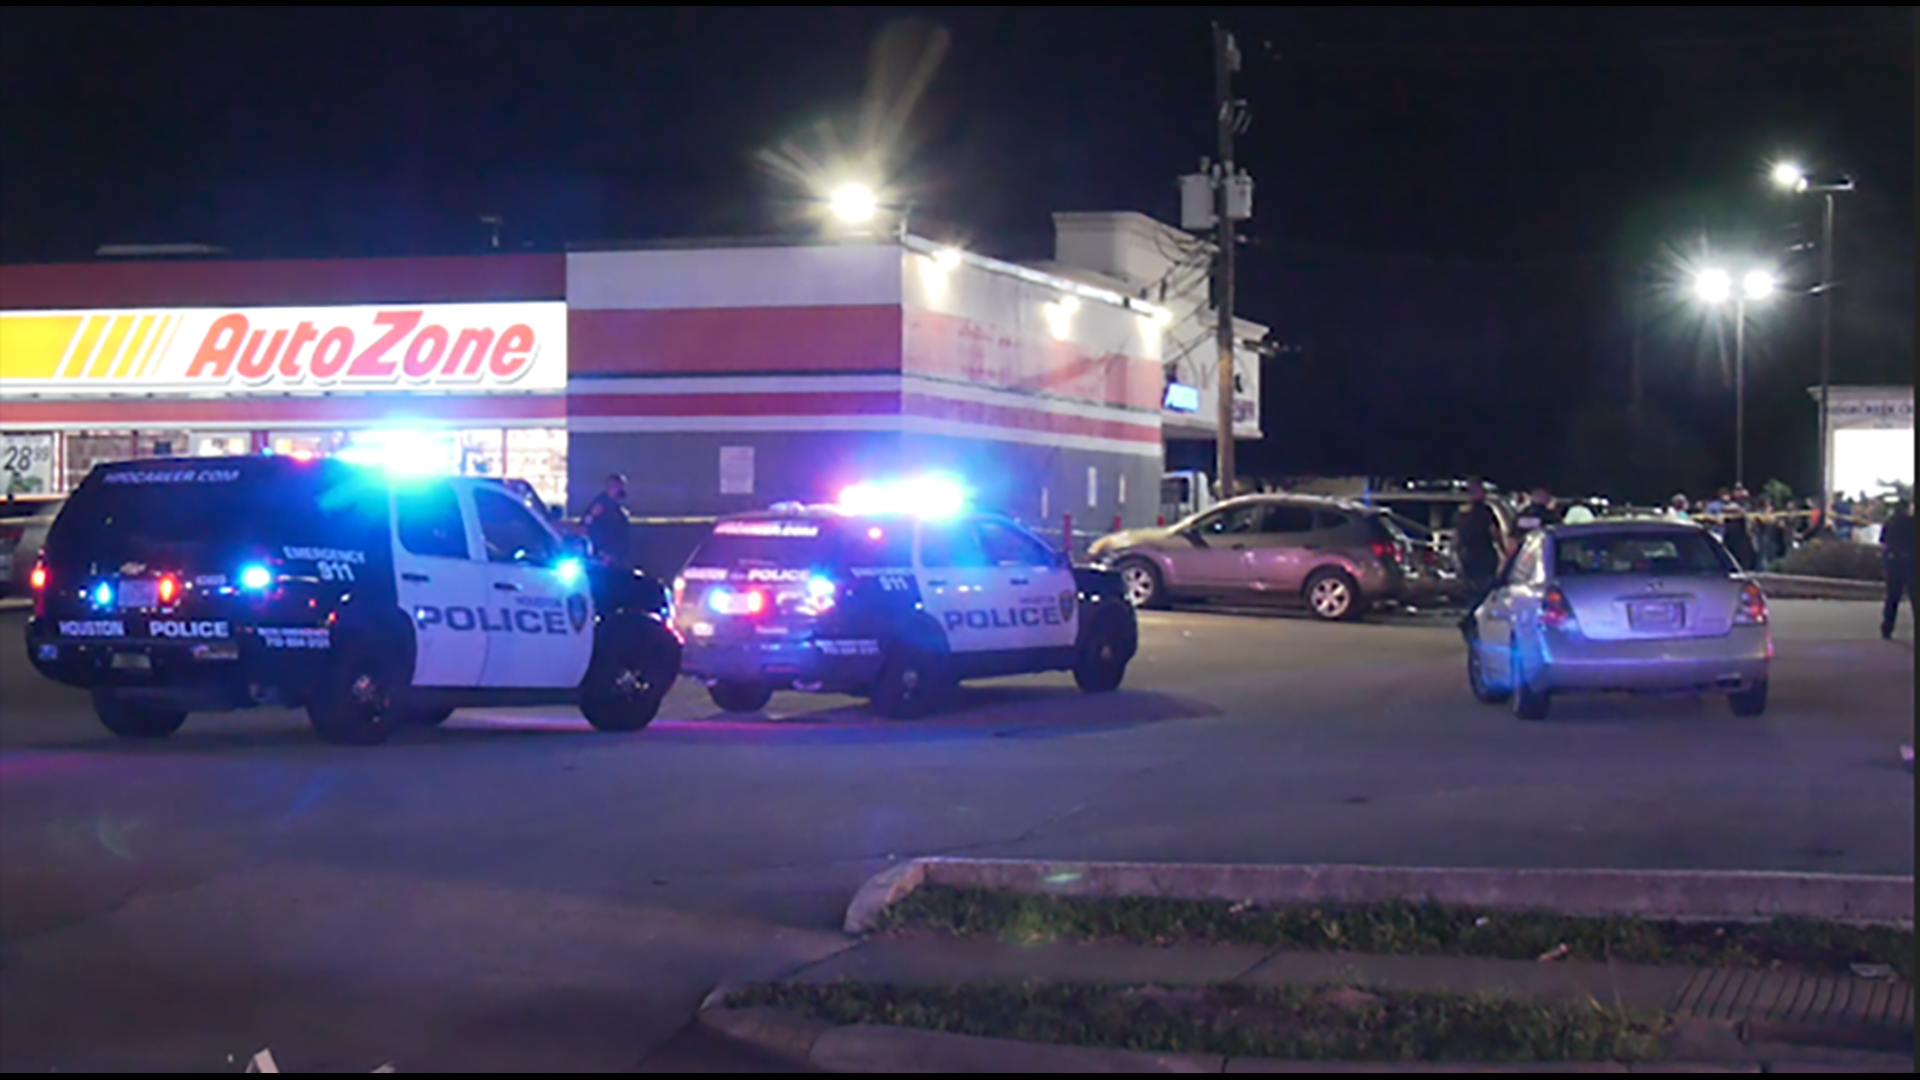 Houston police said the incident started as an altercation at an Auto Zone on South Post Oak but it escalated into a shooting that left one man dead.